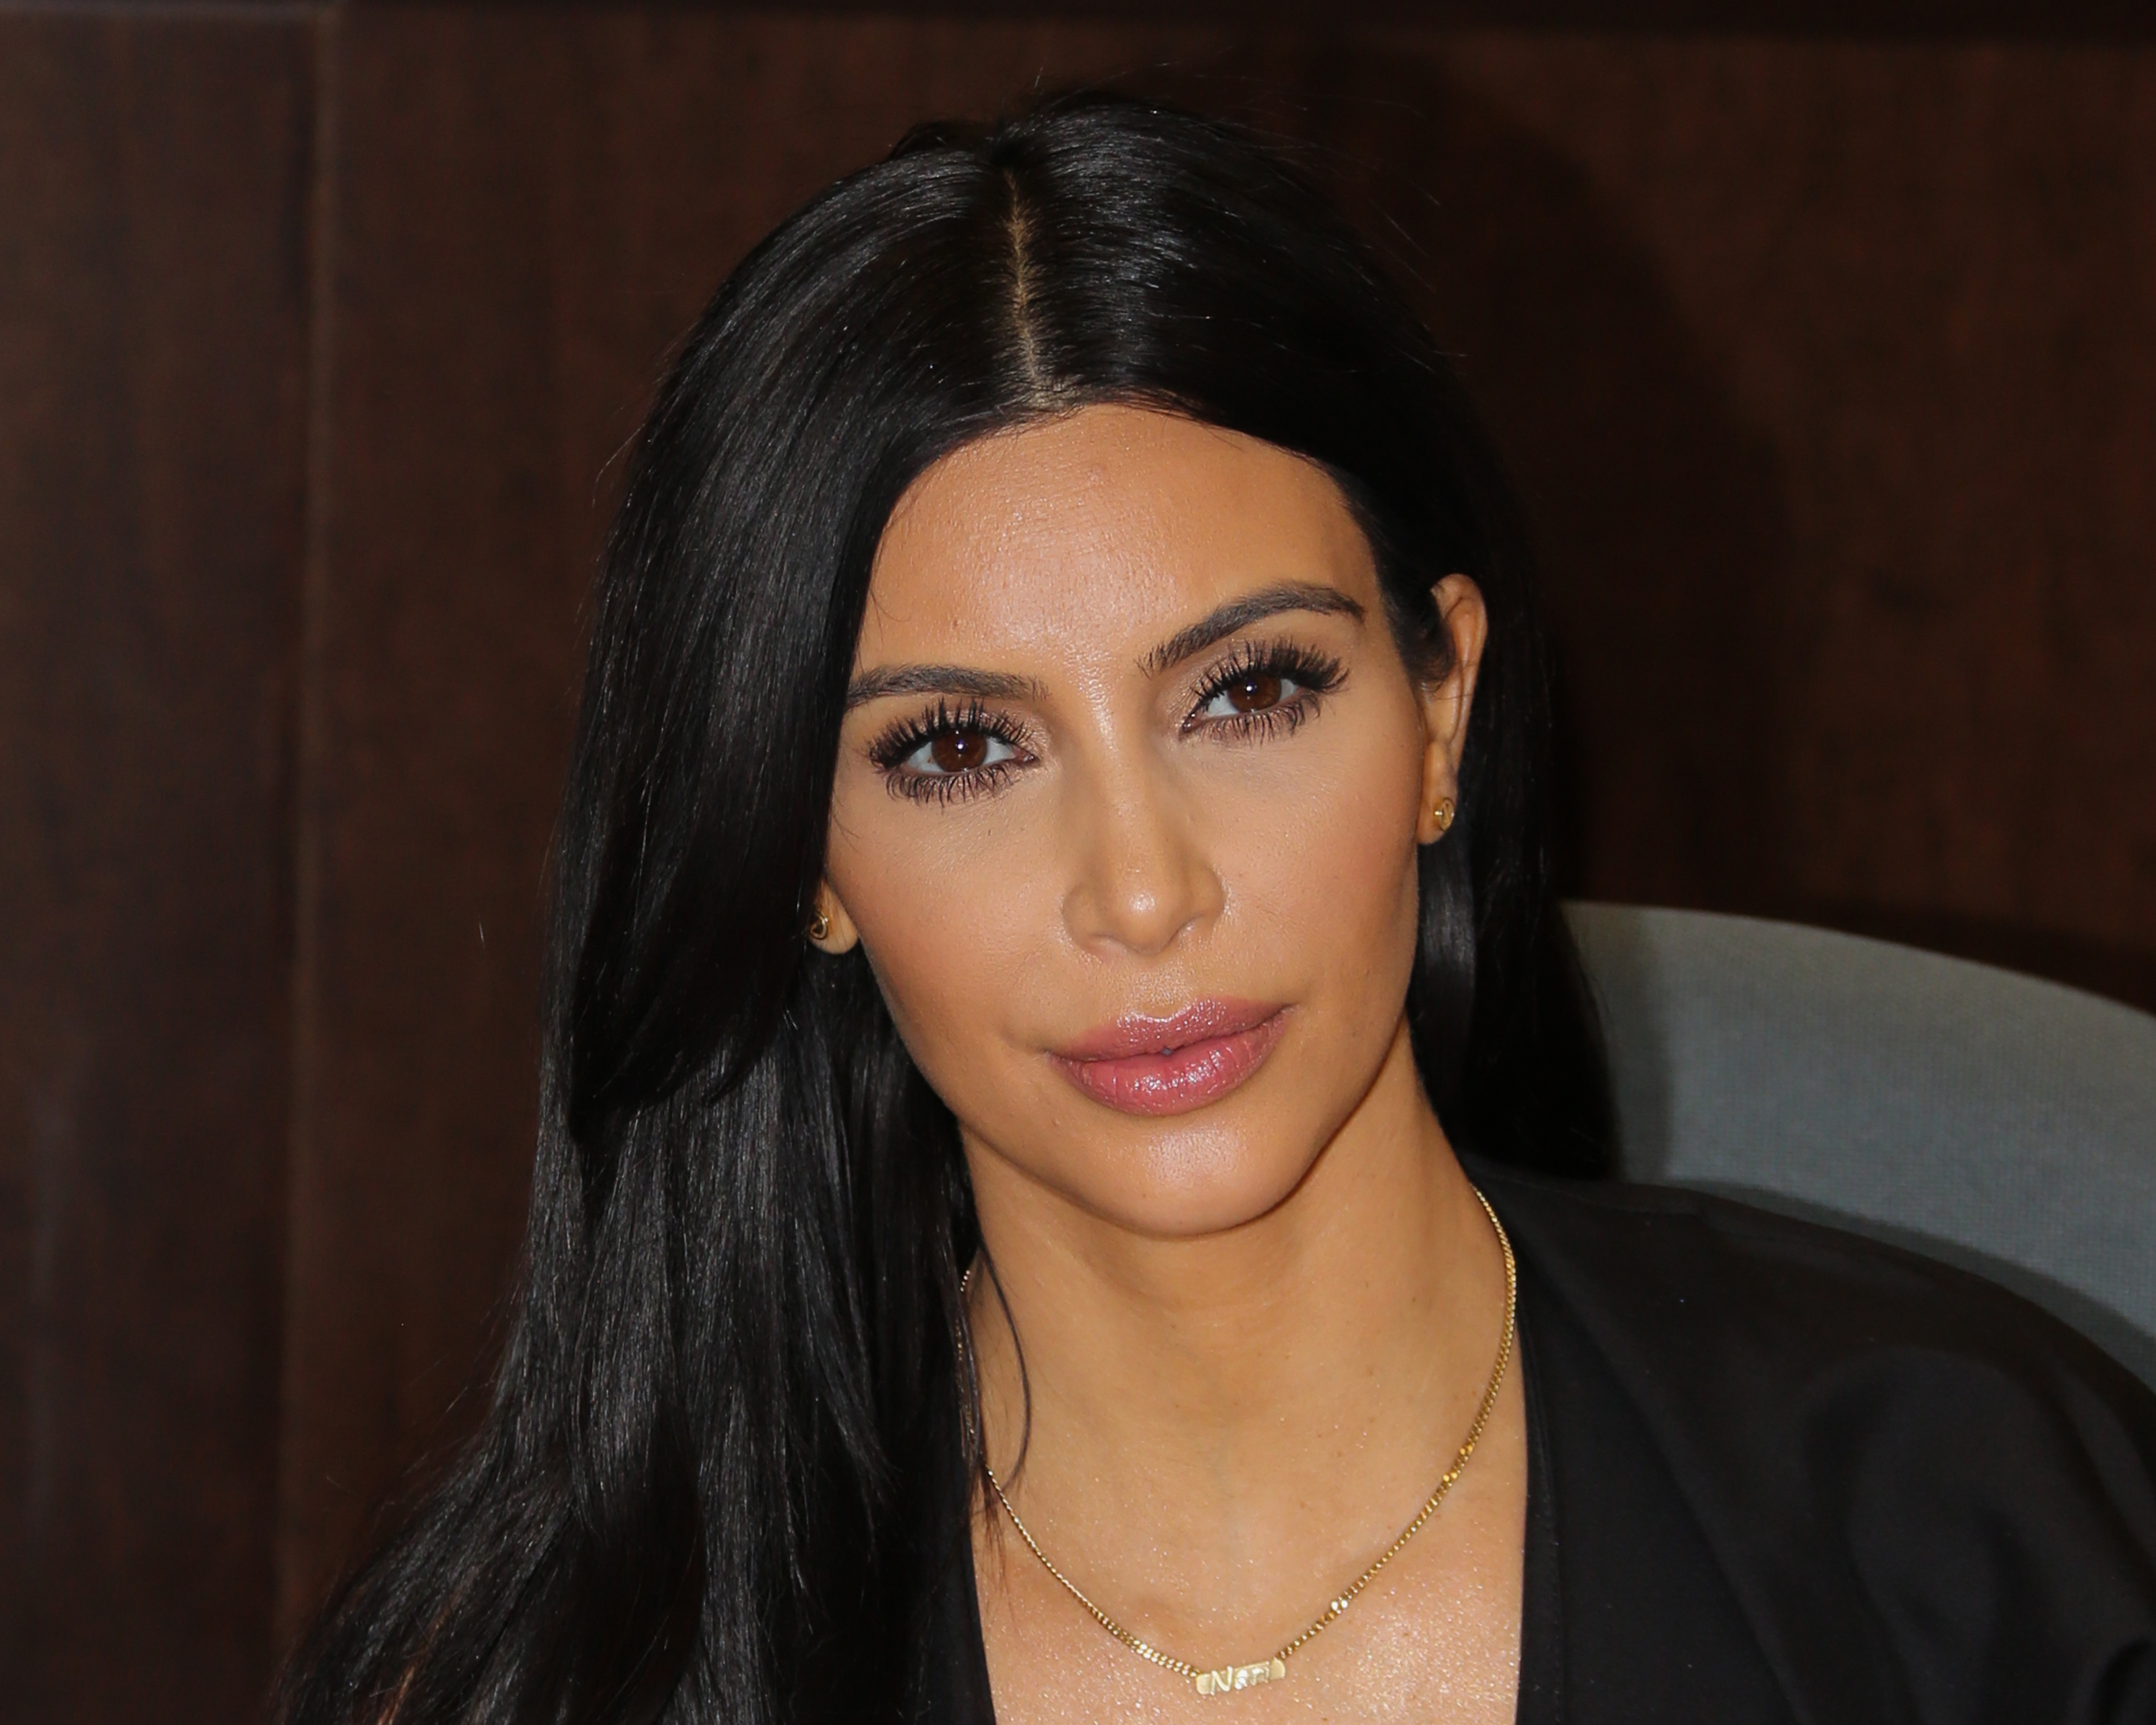 Reality TV Personality Kim Kardashian signs copies of her new book  